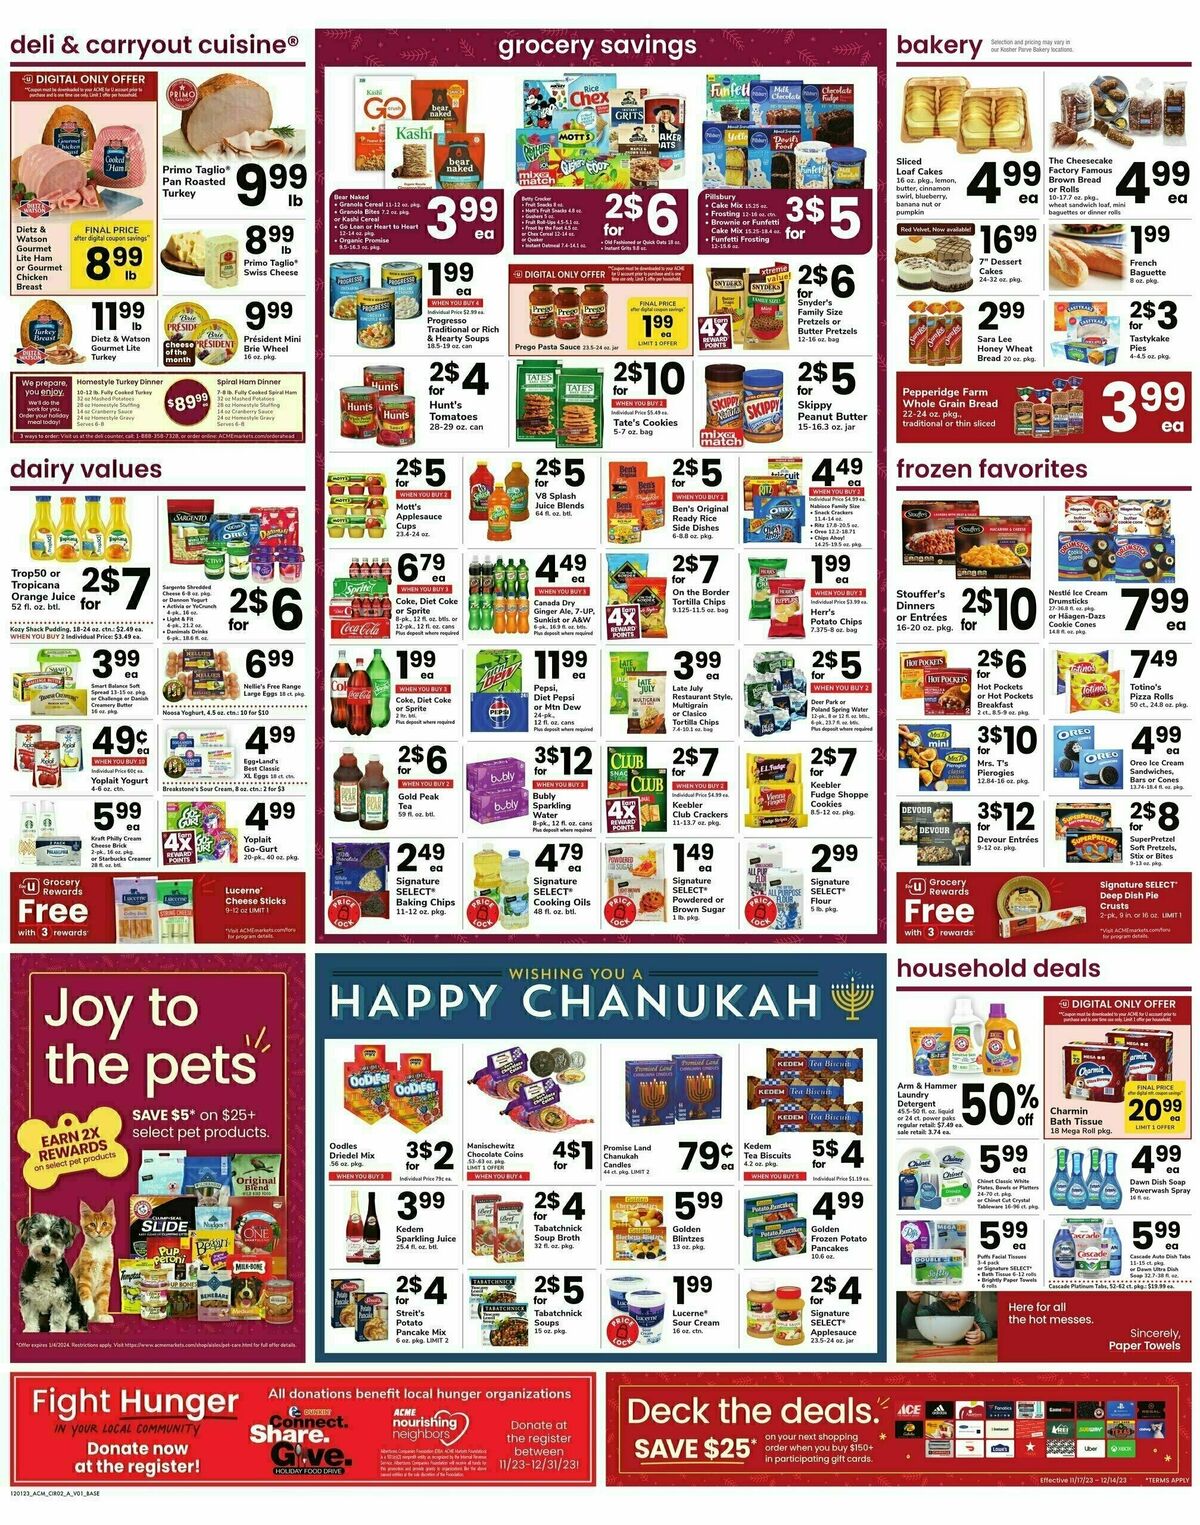 ACME Markets Weekly Ad from December 1